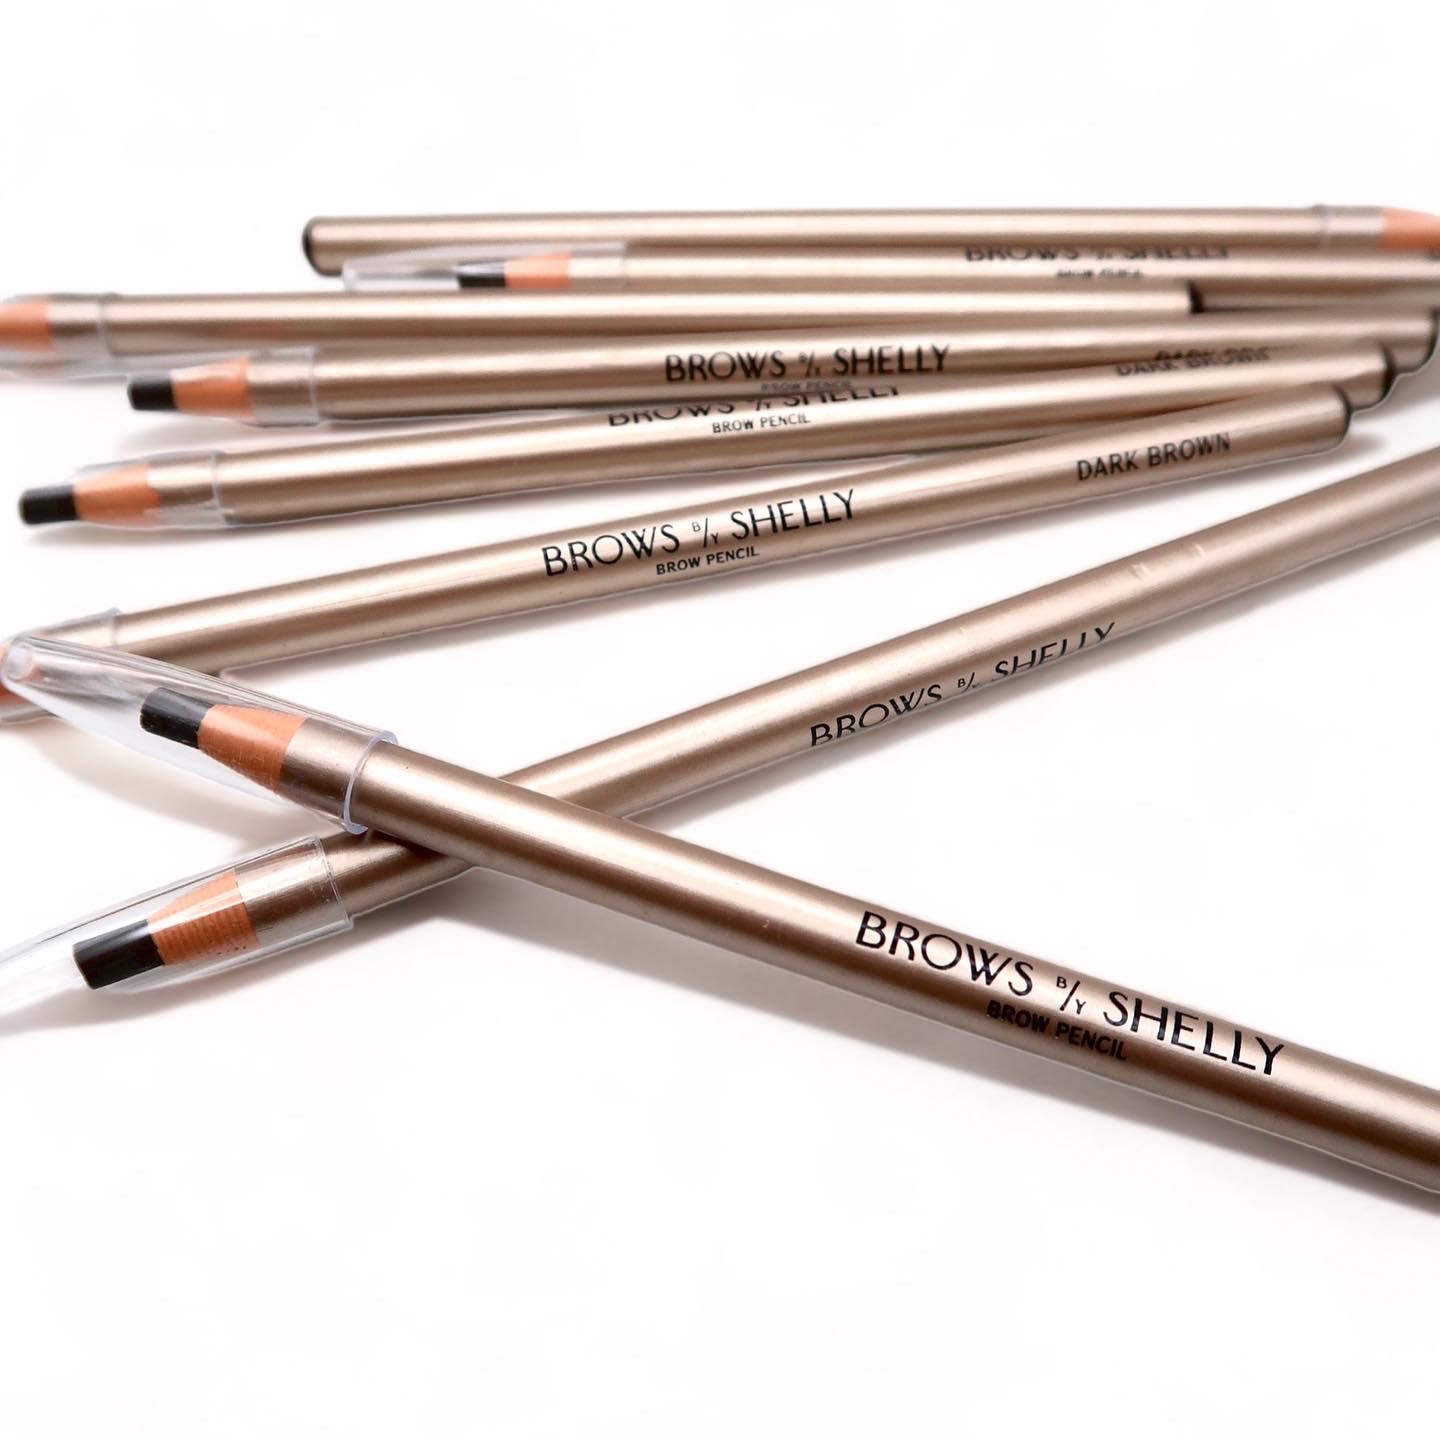 The Art of Brow Tattooing: Brows by Shelly’s Innovative Wax Pencil
and Concealer for Precise Pre-Draws